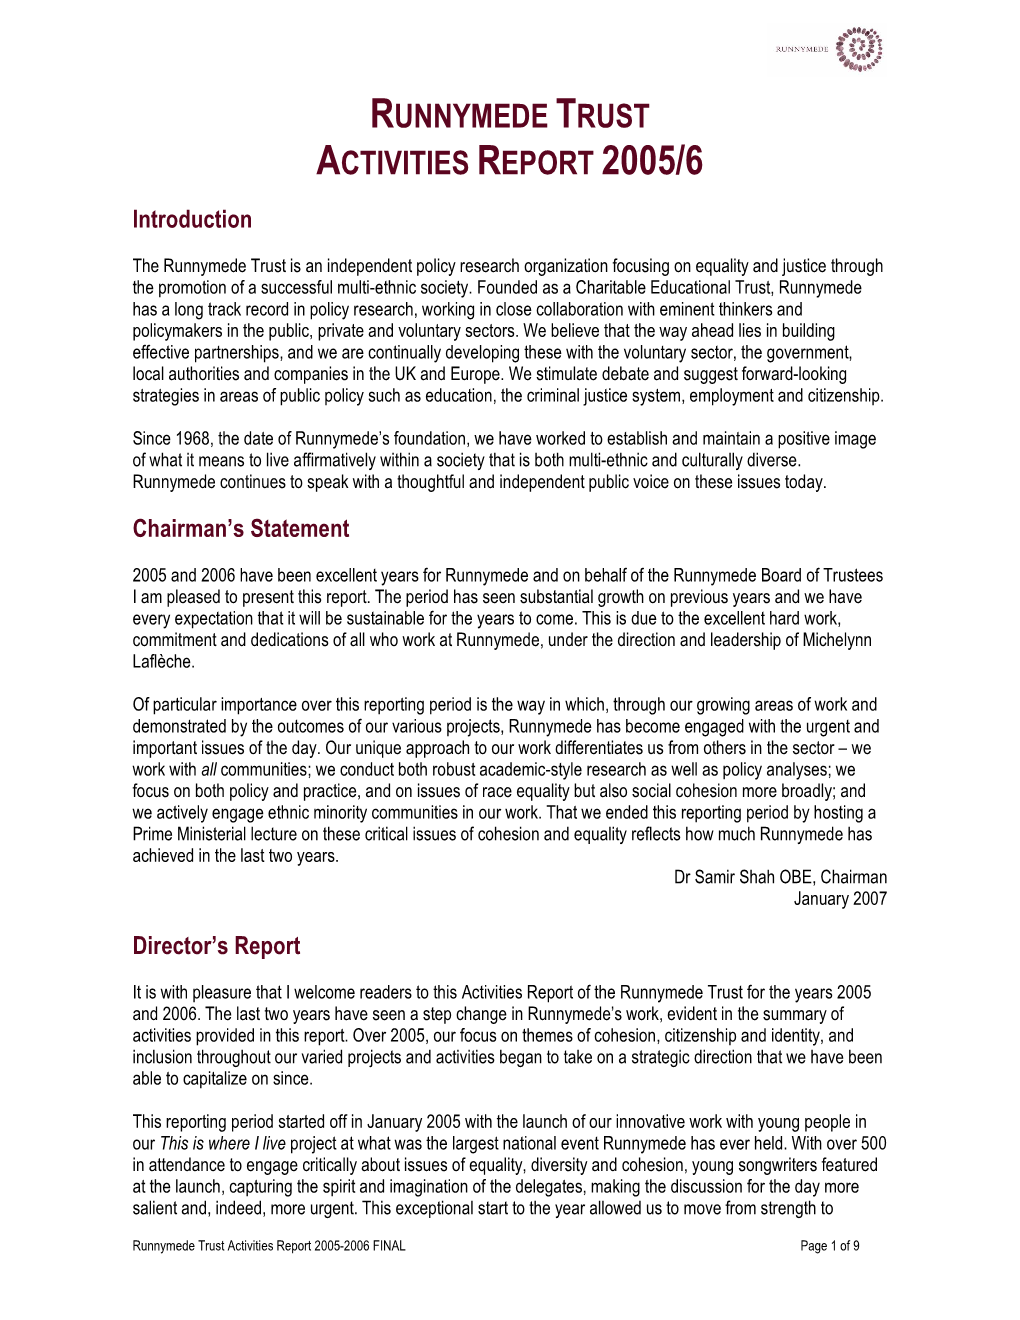 Runnymede Trust Activities Report 2005-2006 FINAL Page 1 of 9